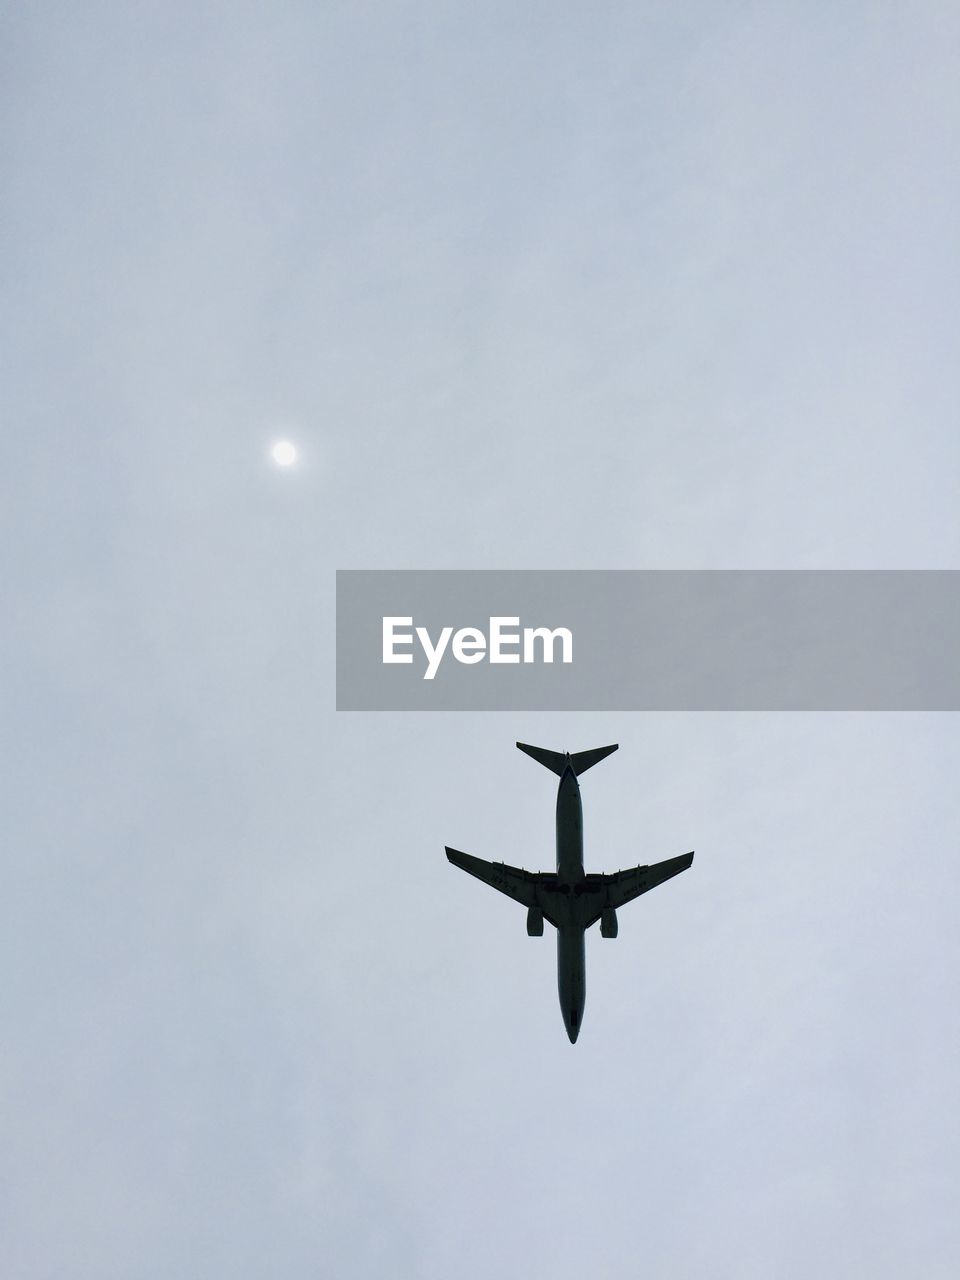 LOW ANGLE VIEW OF AIRPLANE AGAINST SKY